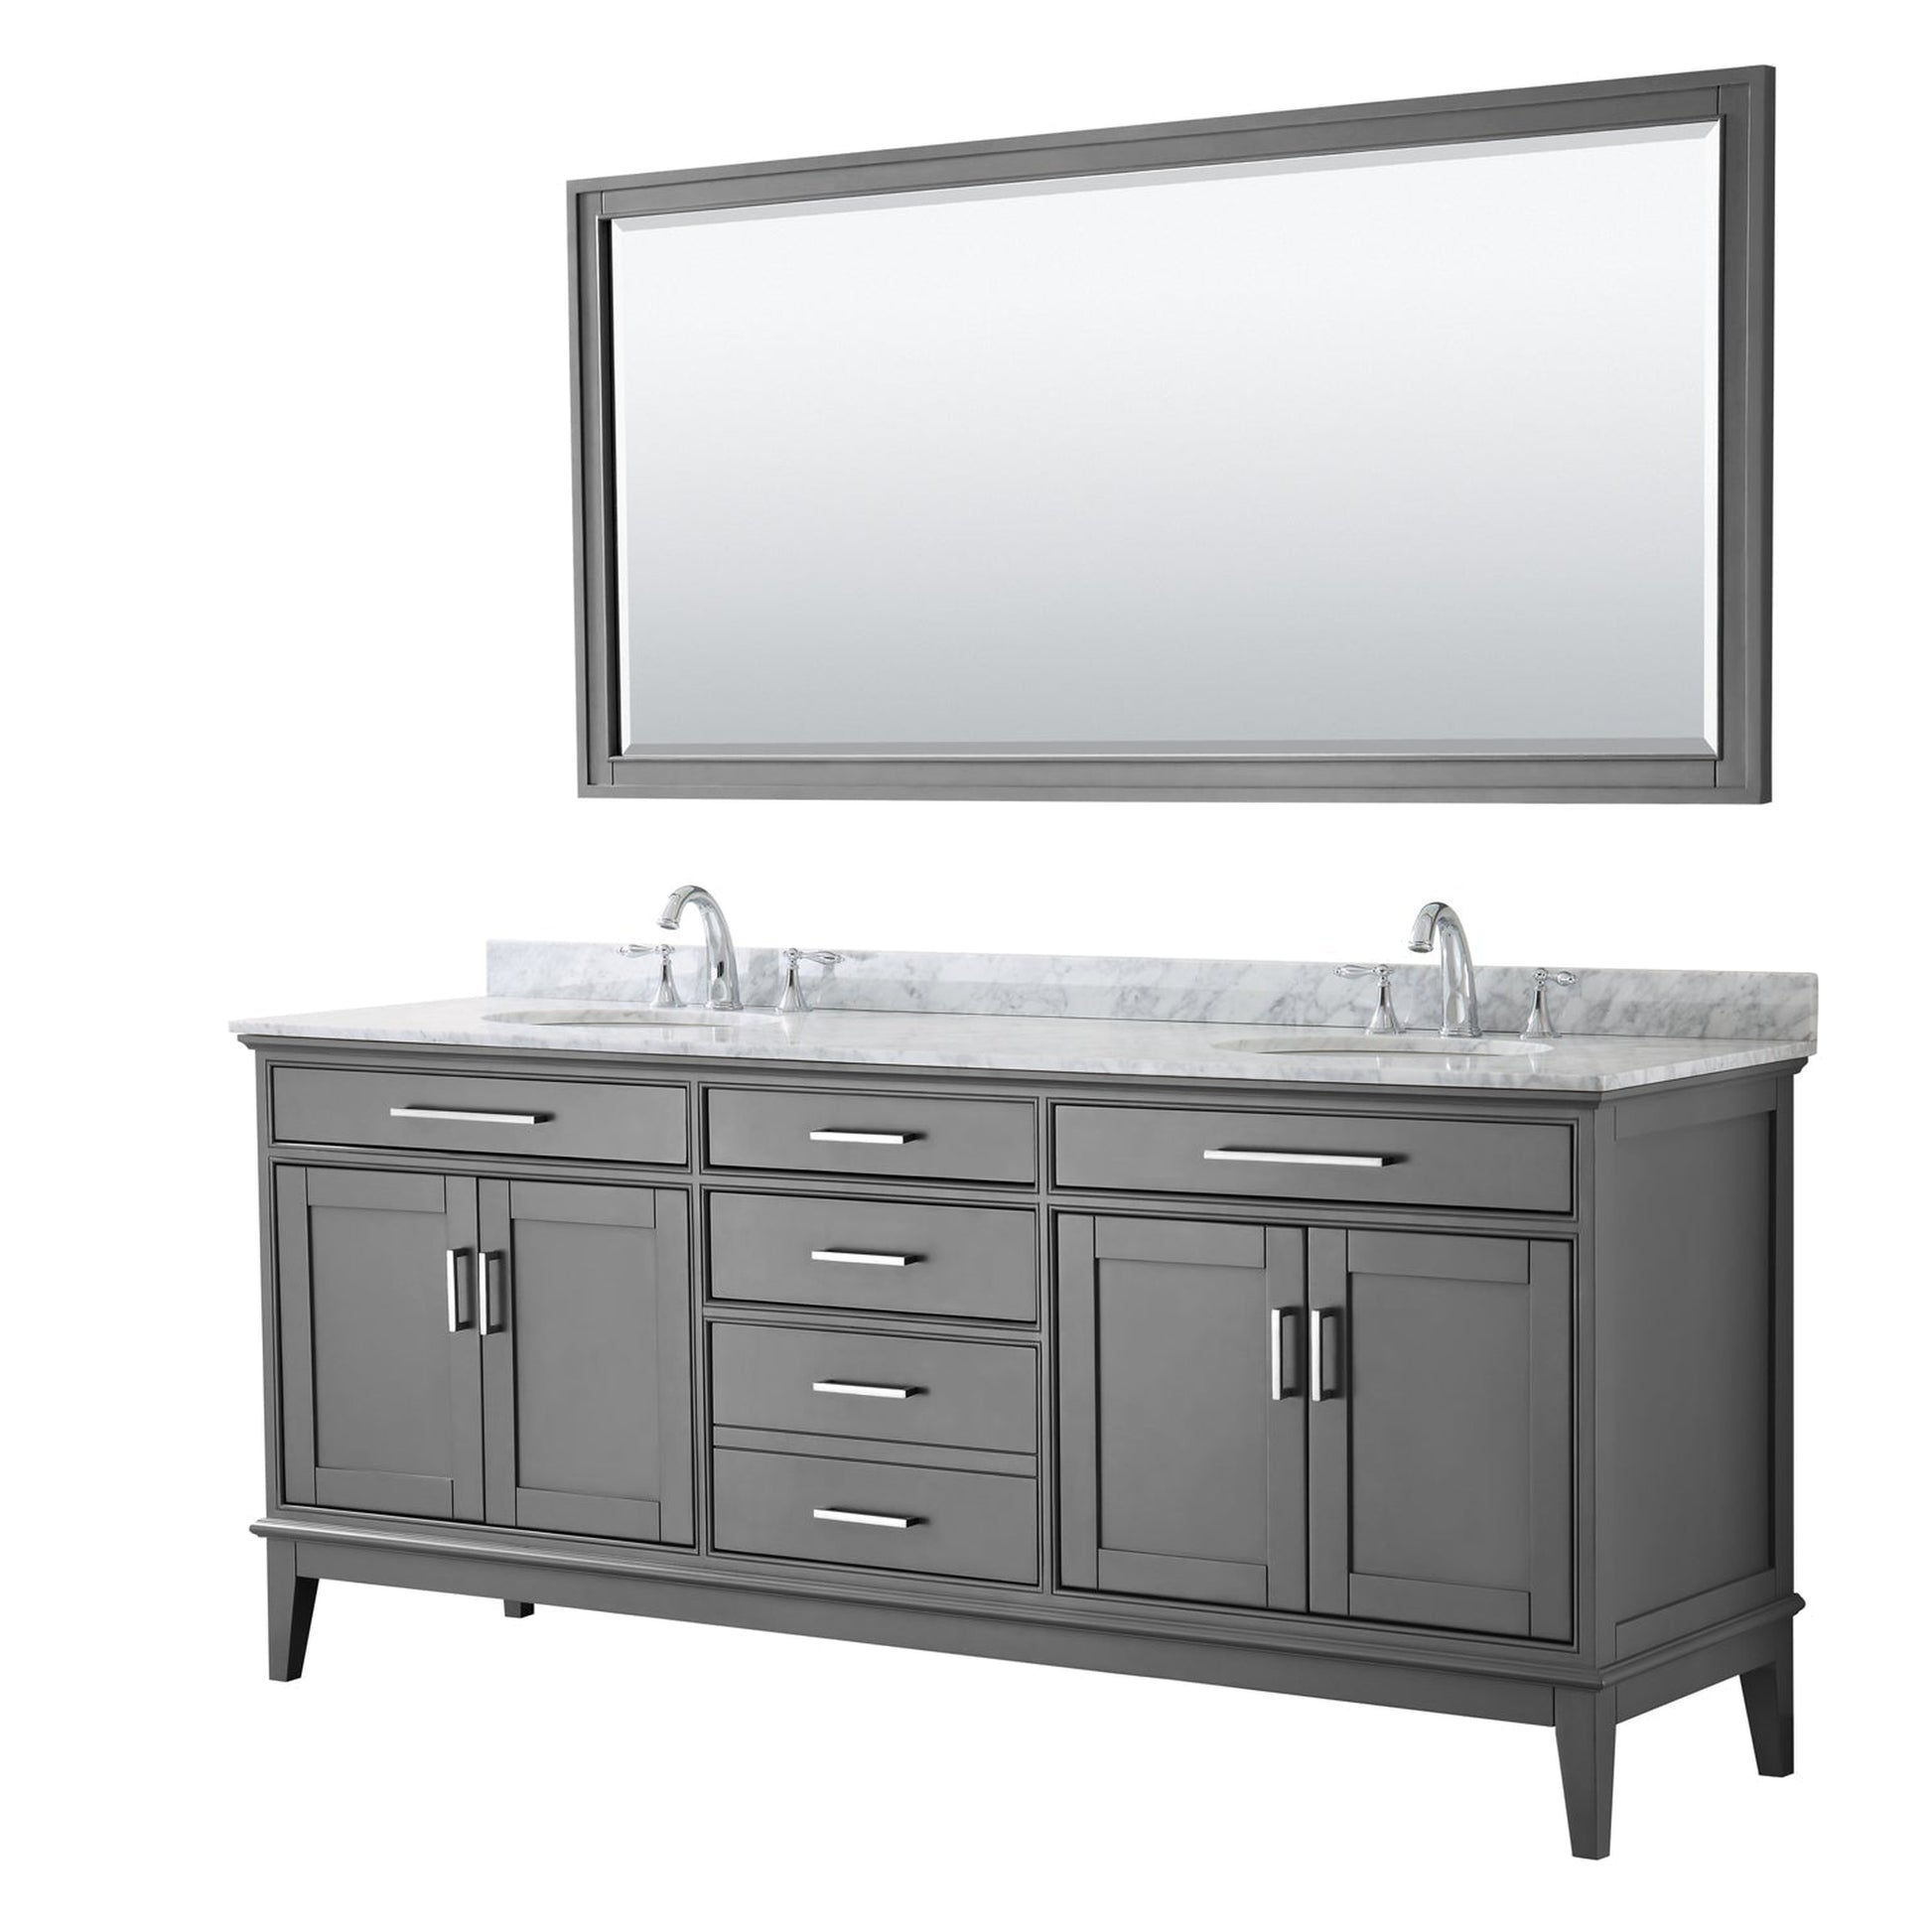 Wyndham Collection Margate 80" Double Bathroom Dark Gray Vanity With White Carrara Marble Countertop, Undermount Oval Sink And 70" Mirror